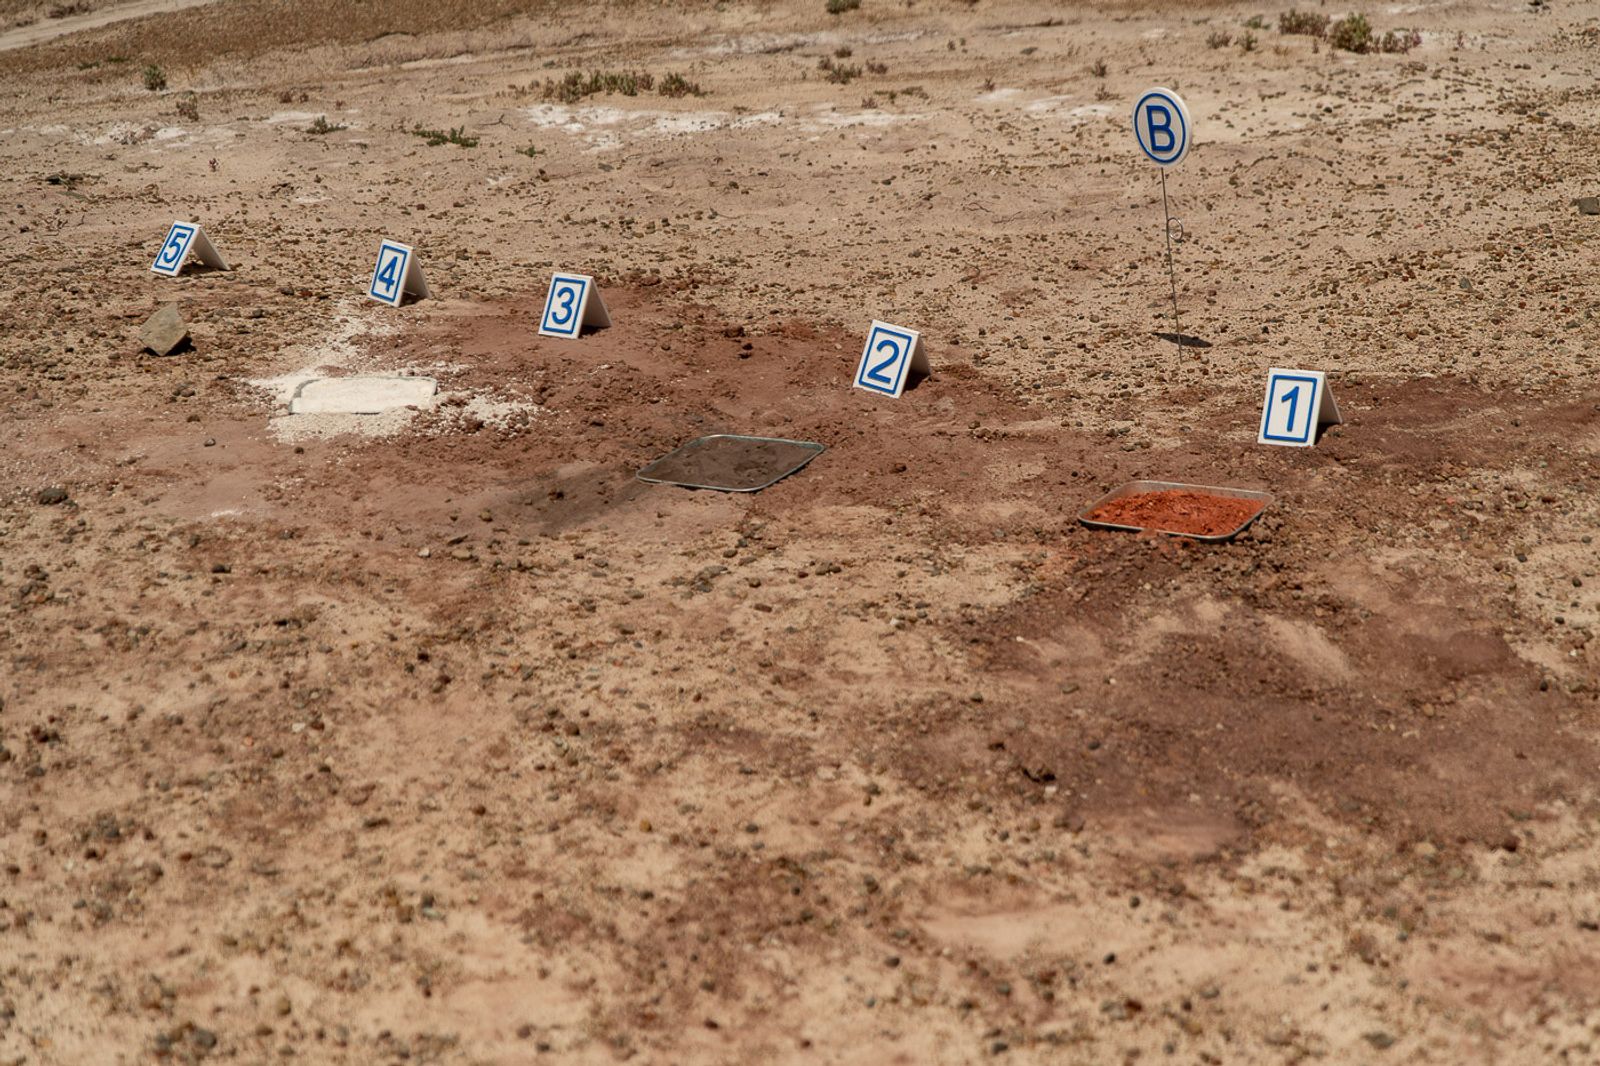 © Matjaz Tancic - The sample collection test site at the Mars Rover competition in Hanksville, Utah.